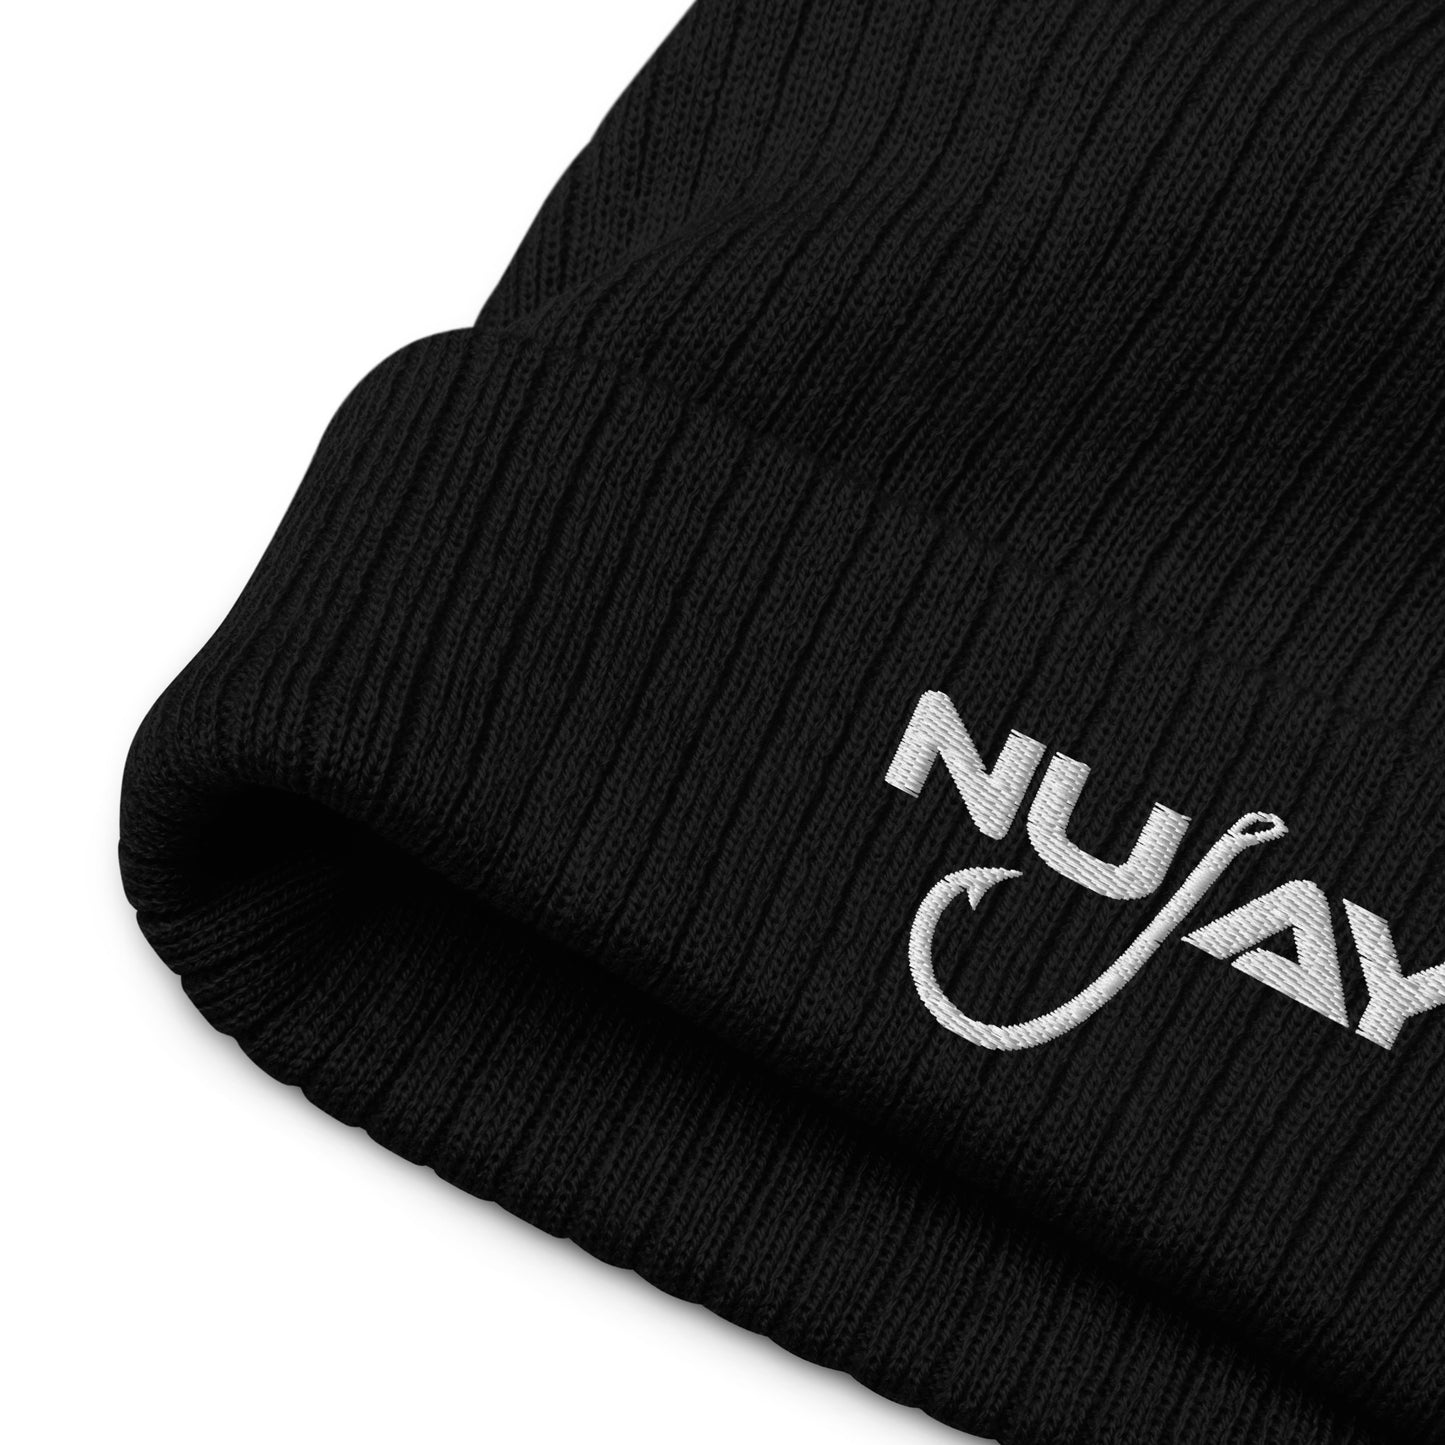 Nujay Outdoors Ribbed Knit Beanie